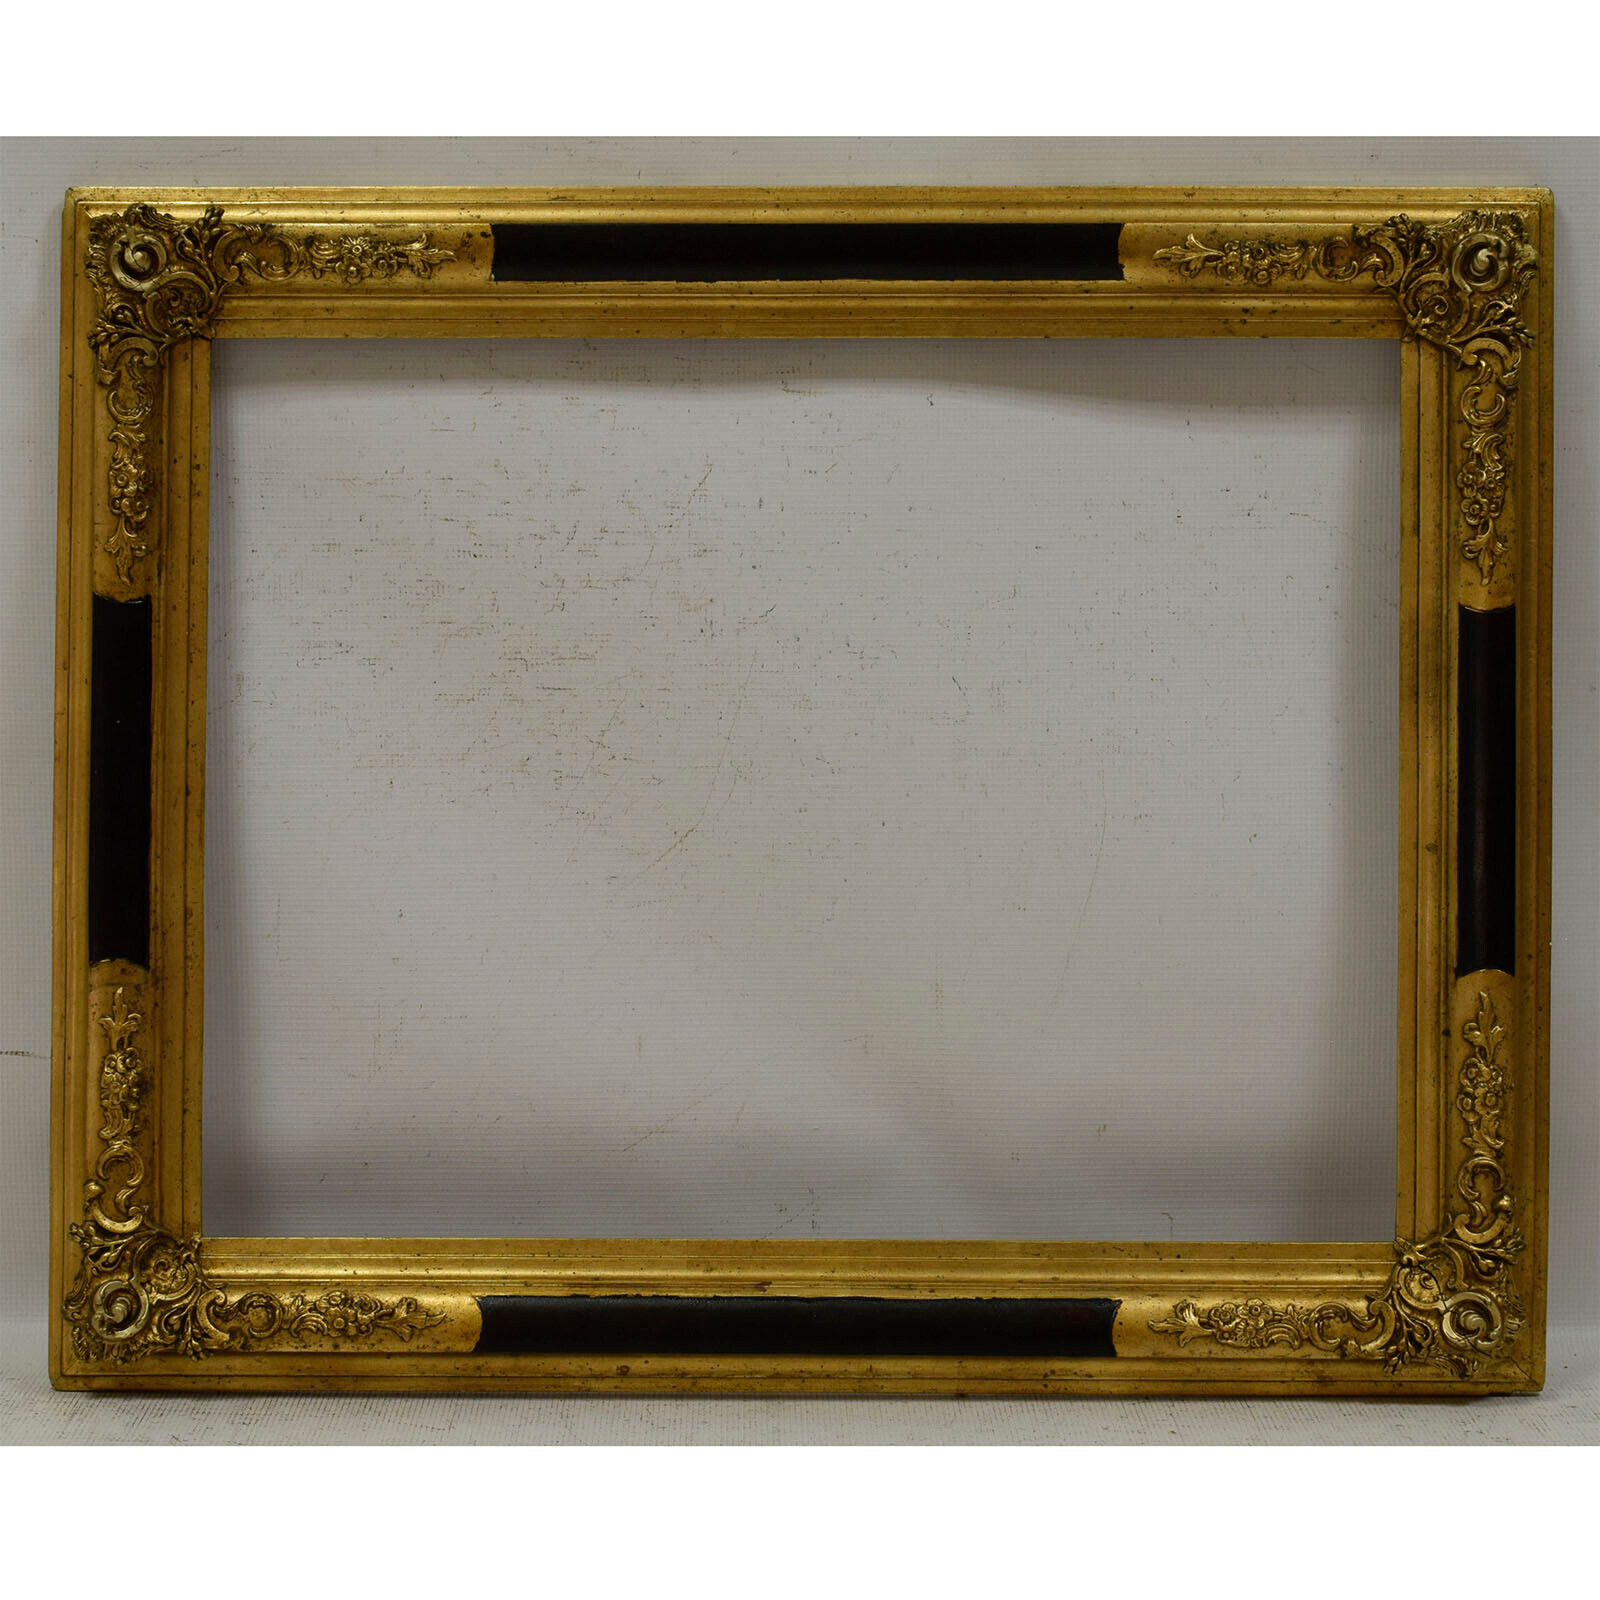 ca 1900 Old wooden frame Original condition Internal: 24x18,3 in